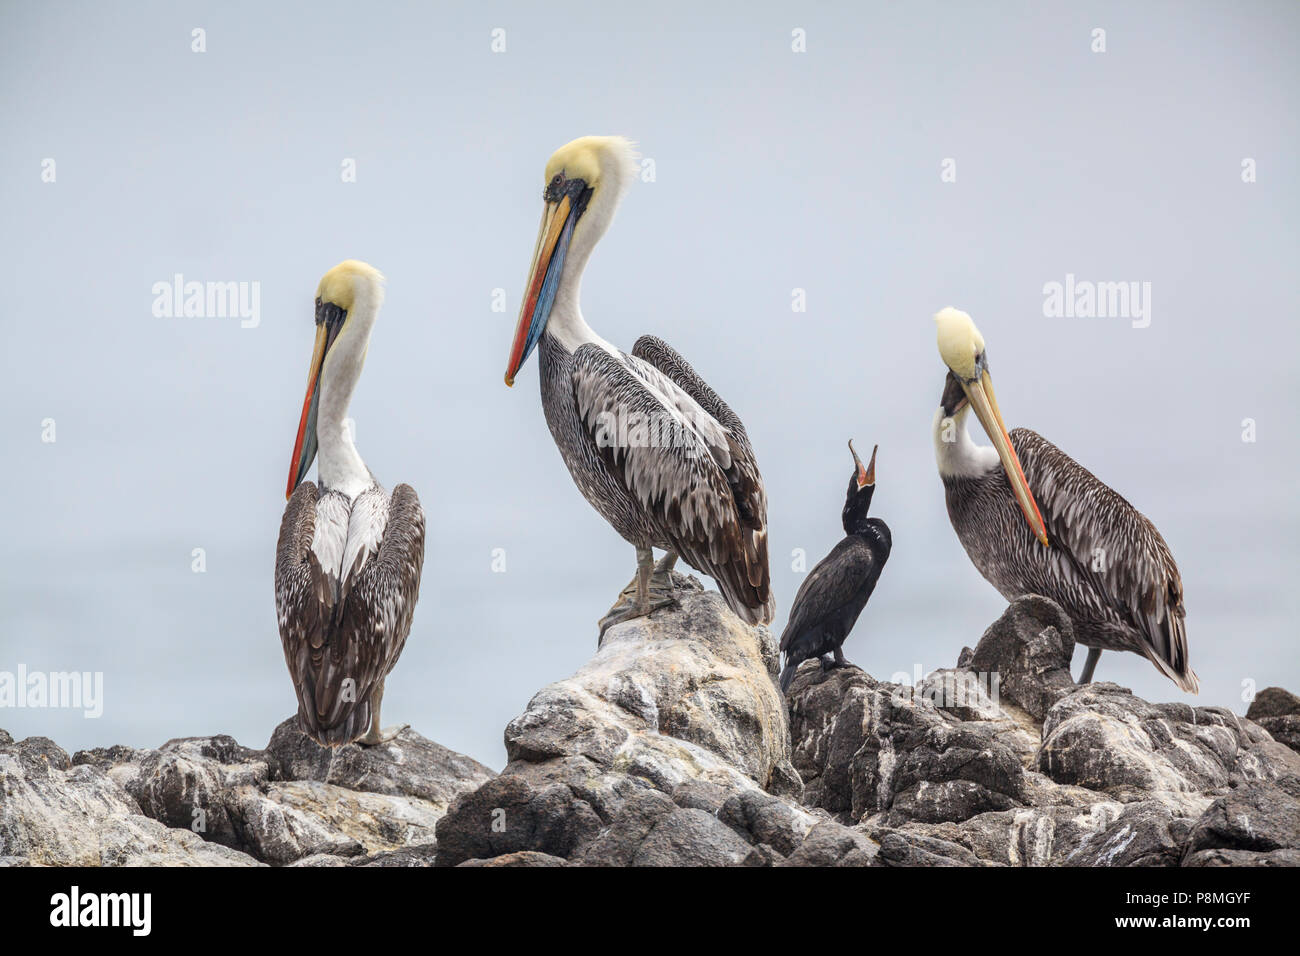 Group of three Peruvian Pelicans and one Neotropic Cormorant on a rock Stock Photo